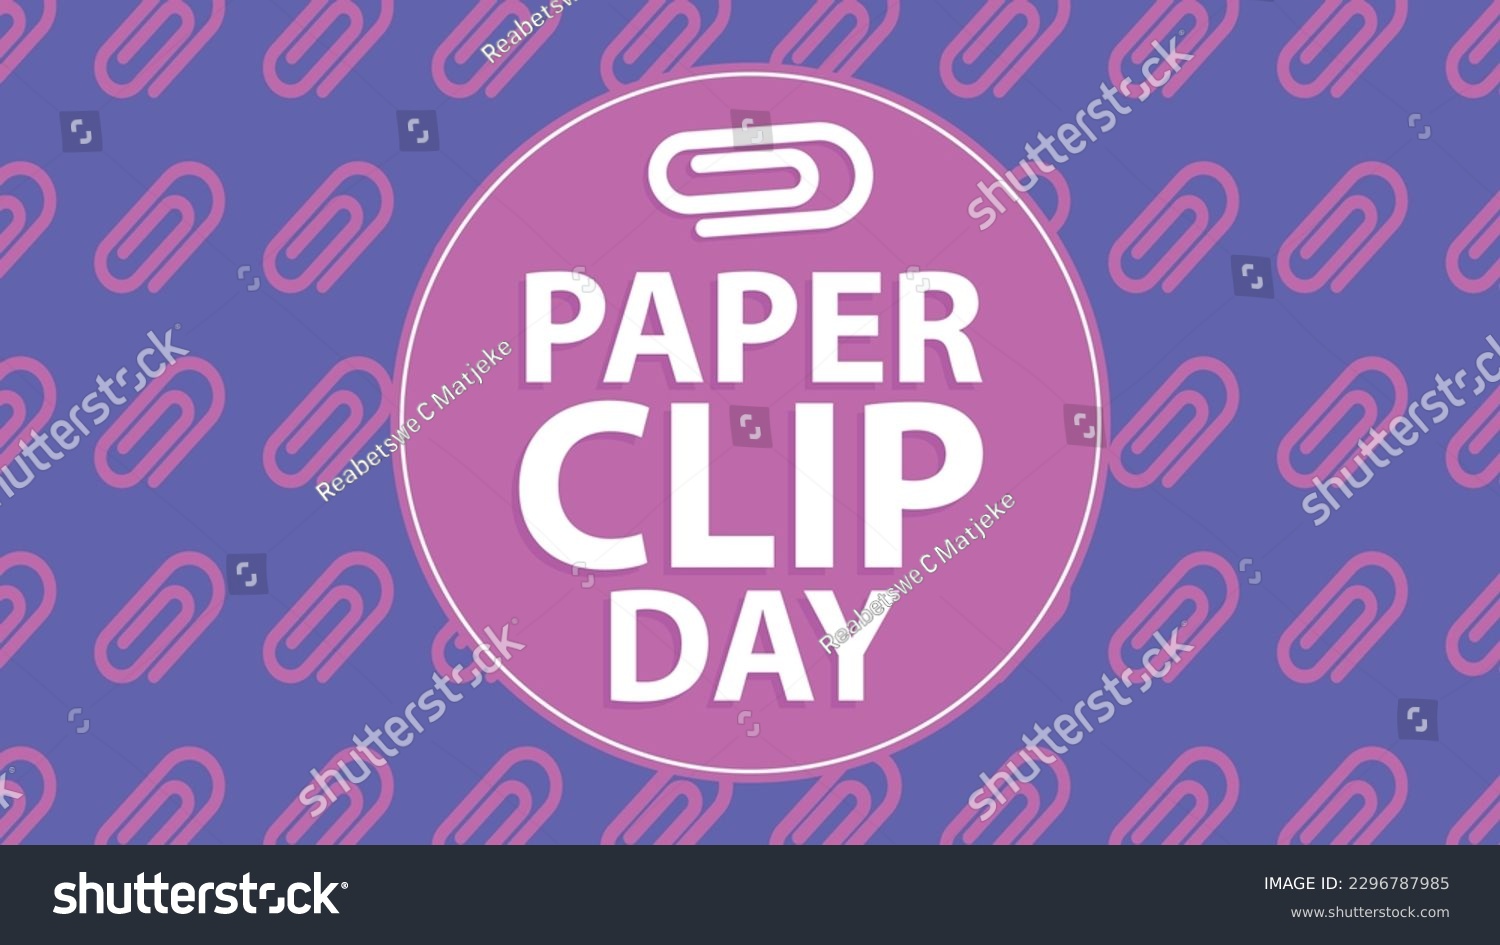 SVG of National Paperclip Day vector banner design with paperclip icon pattern, typography and pink purple colors. National Paperclip Day simple modern poster background illustration. May 29th  holiday. svg